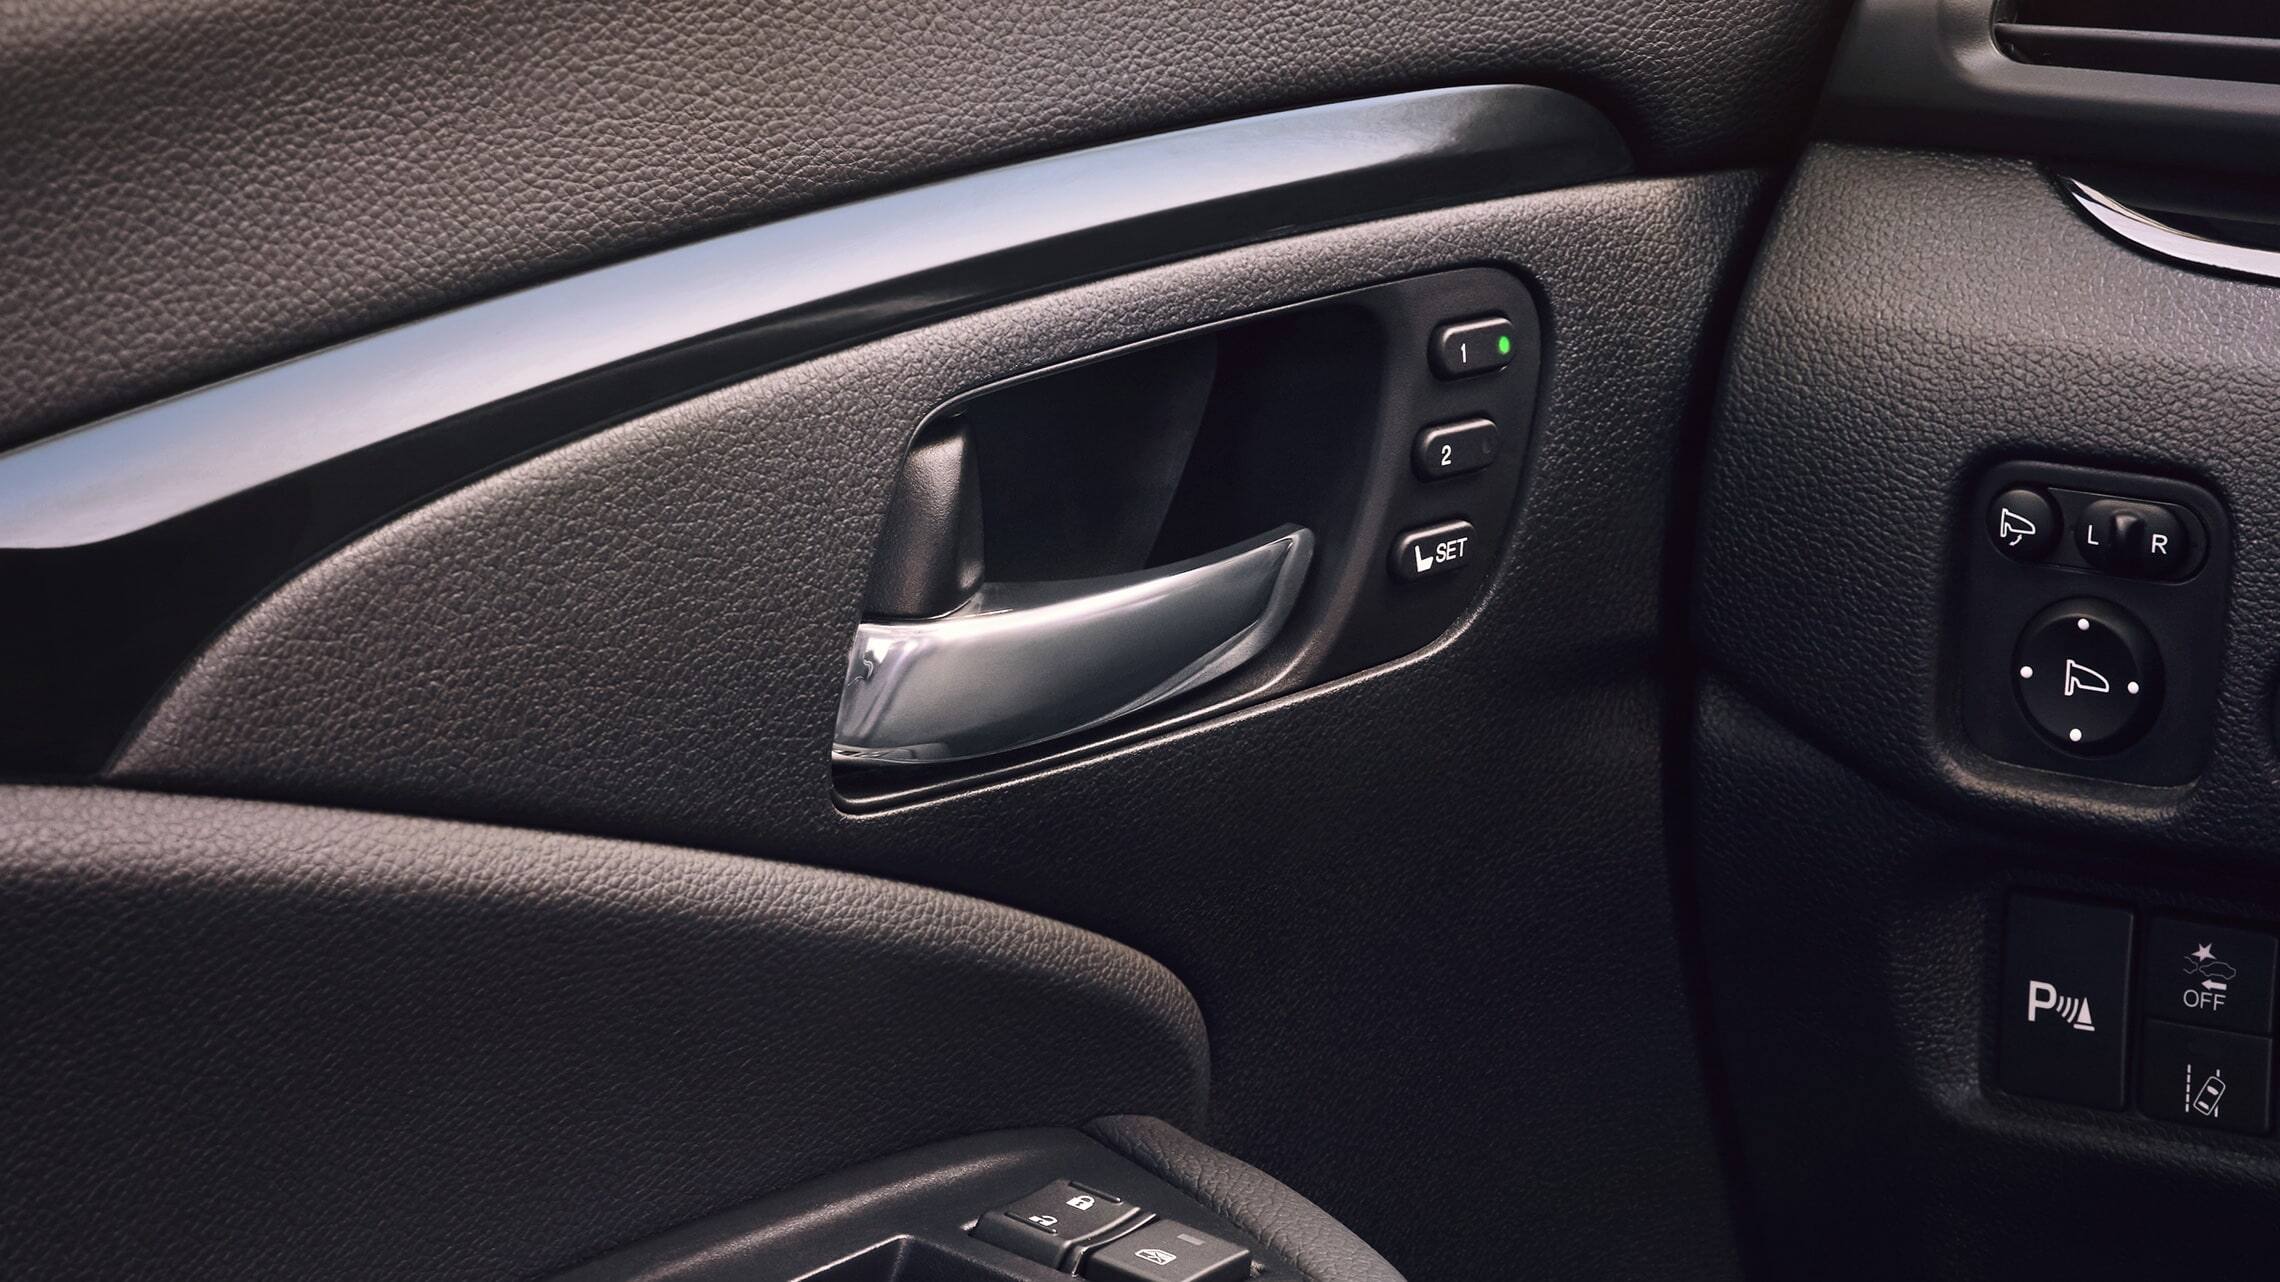 Driver’s seat memory setting detail on the 2019 Honda Passport Elite with Black Leather interior.